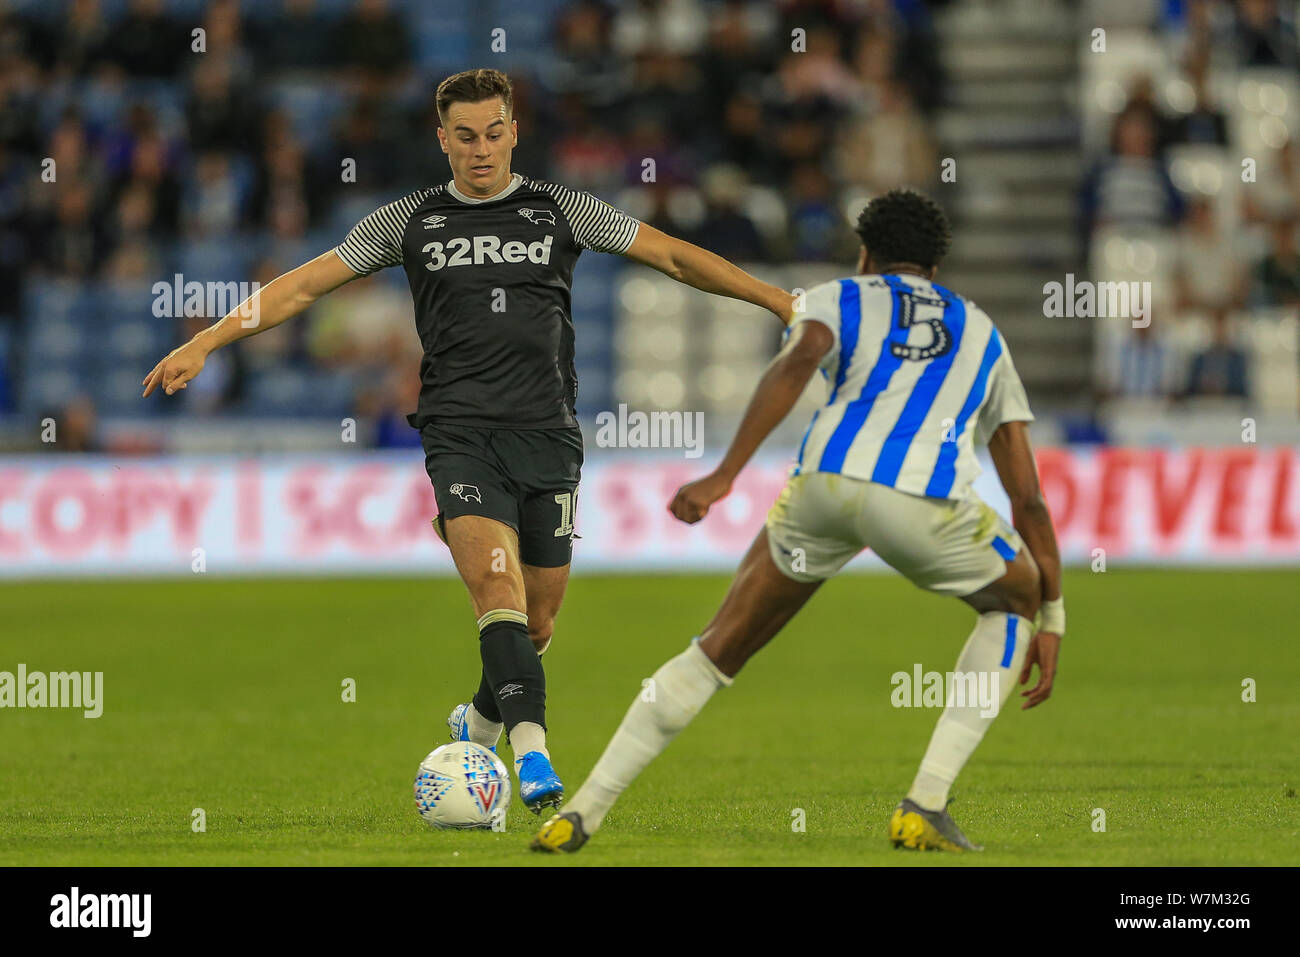 5th August 2019, John Smiths Stadium, Huddersfield England; Sky Bet Championship, Huddersfield Town vs Derby County ; Tom Lawrence (10) of Derby County in action during the game   Credit: Mark Cosgrove/News Images  English Football League images are subject to DataCo Licence Stock Photo